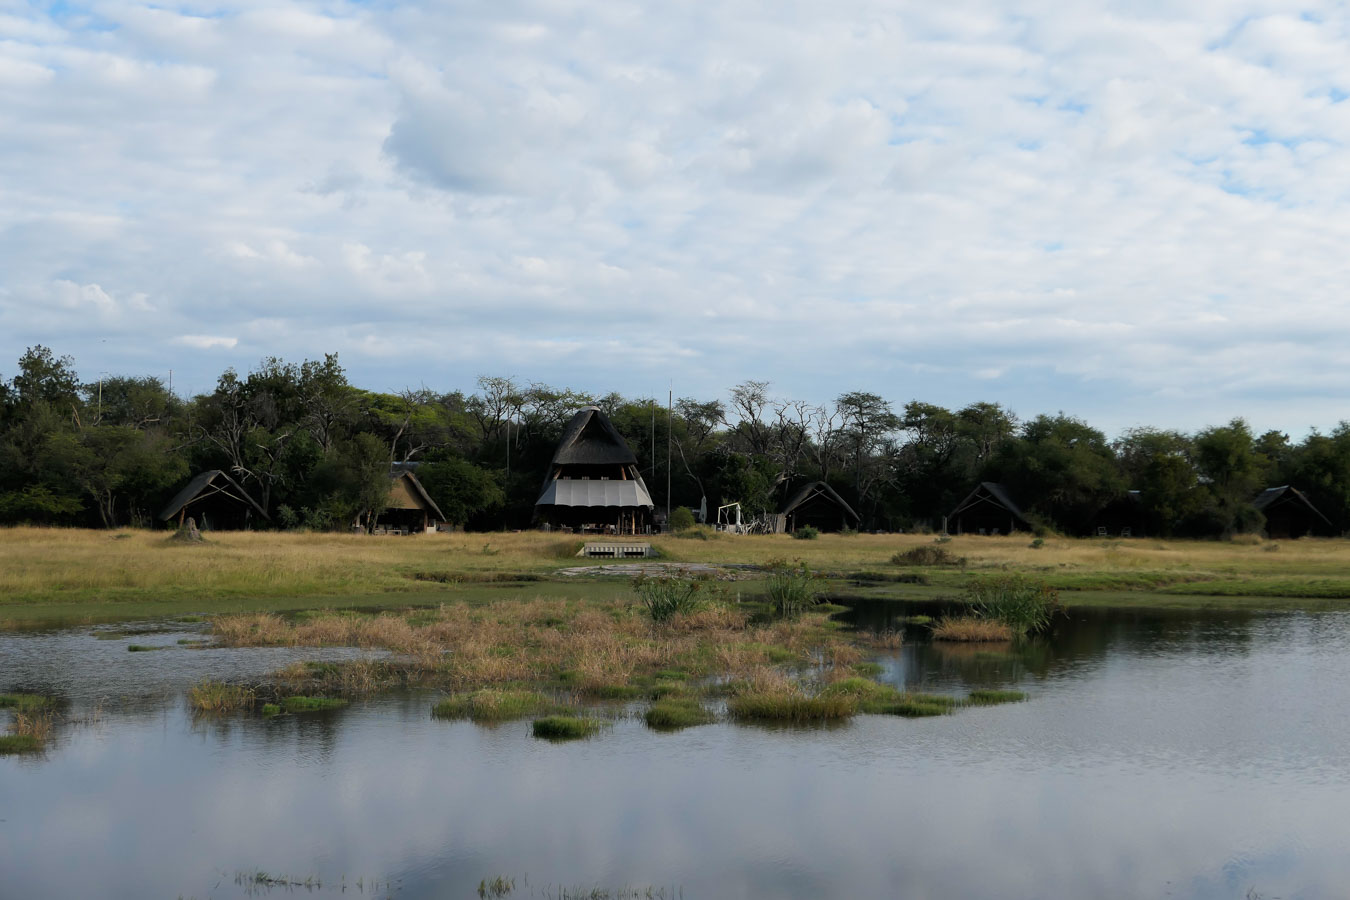 Where to Stay in Hwange National Park - The Hide Photo Review